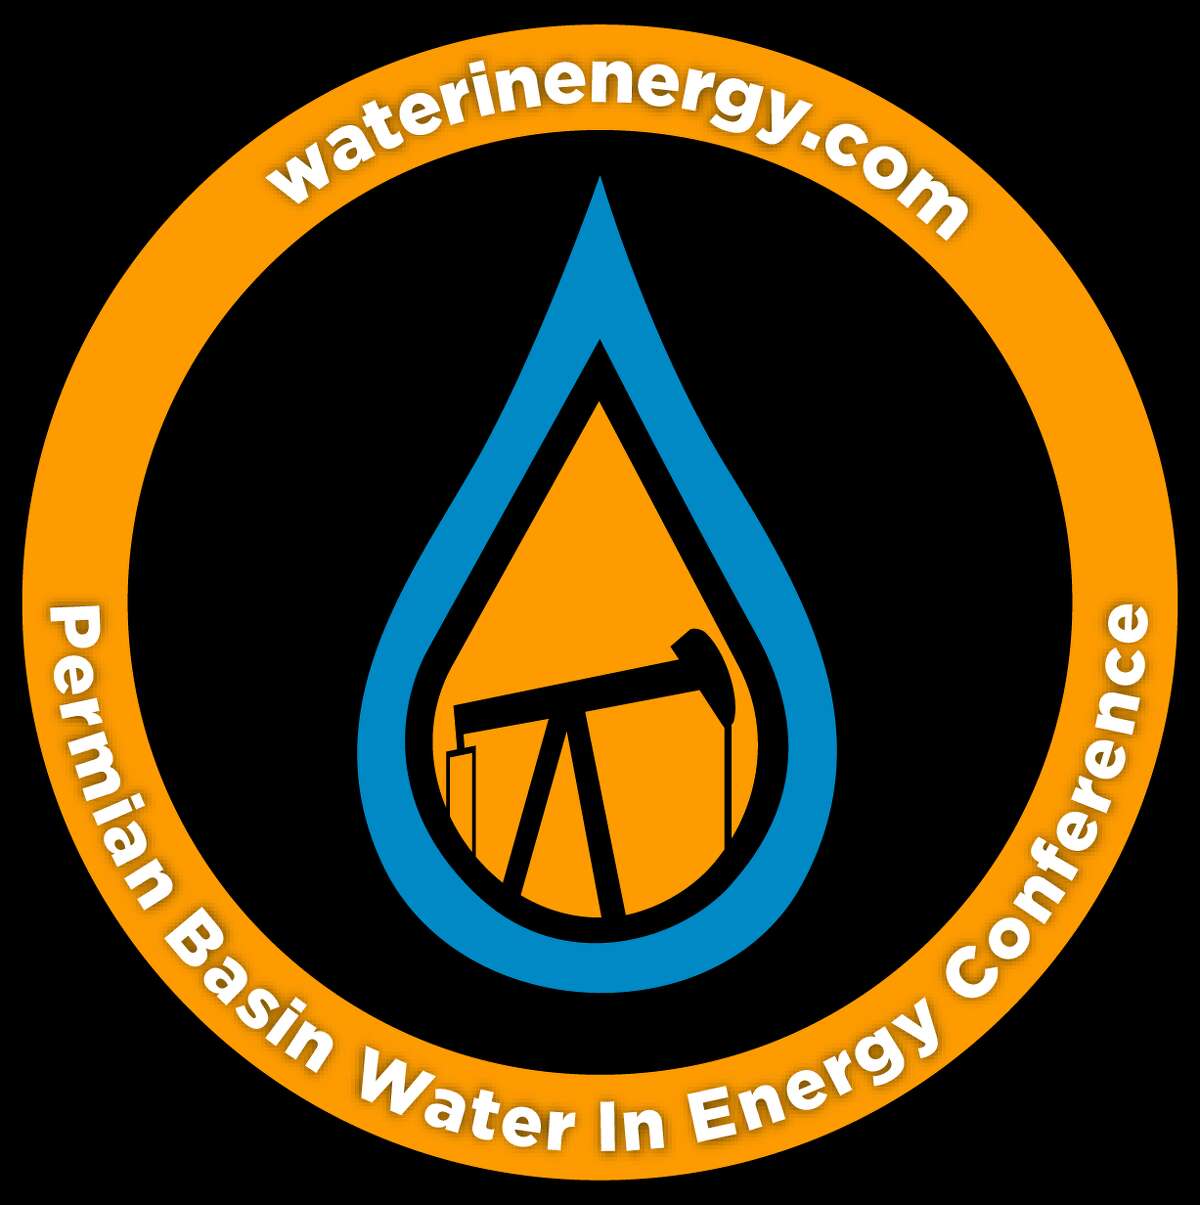 Permian Basin Water In Energy Conference logo